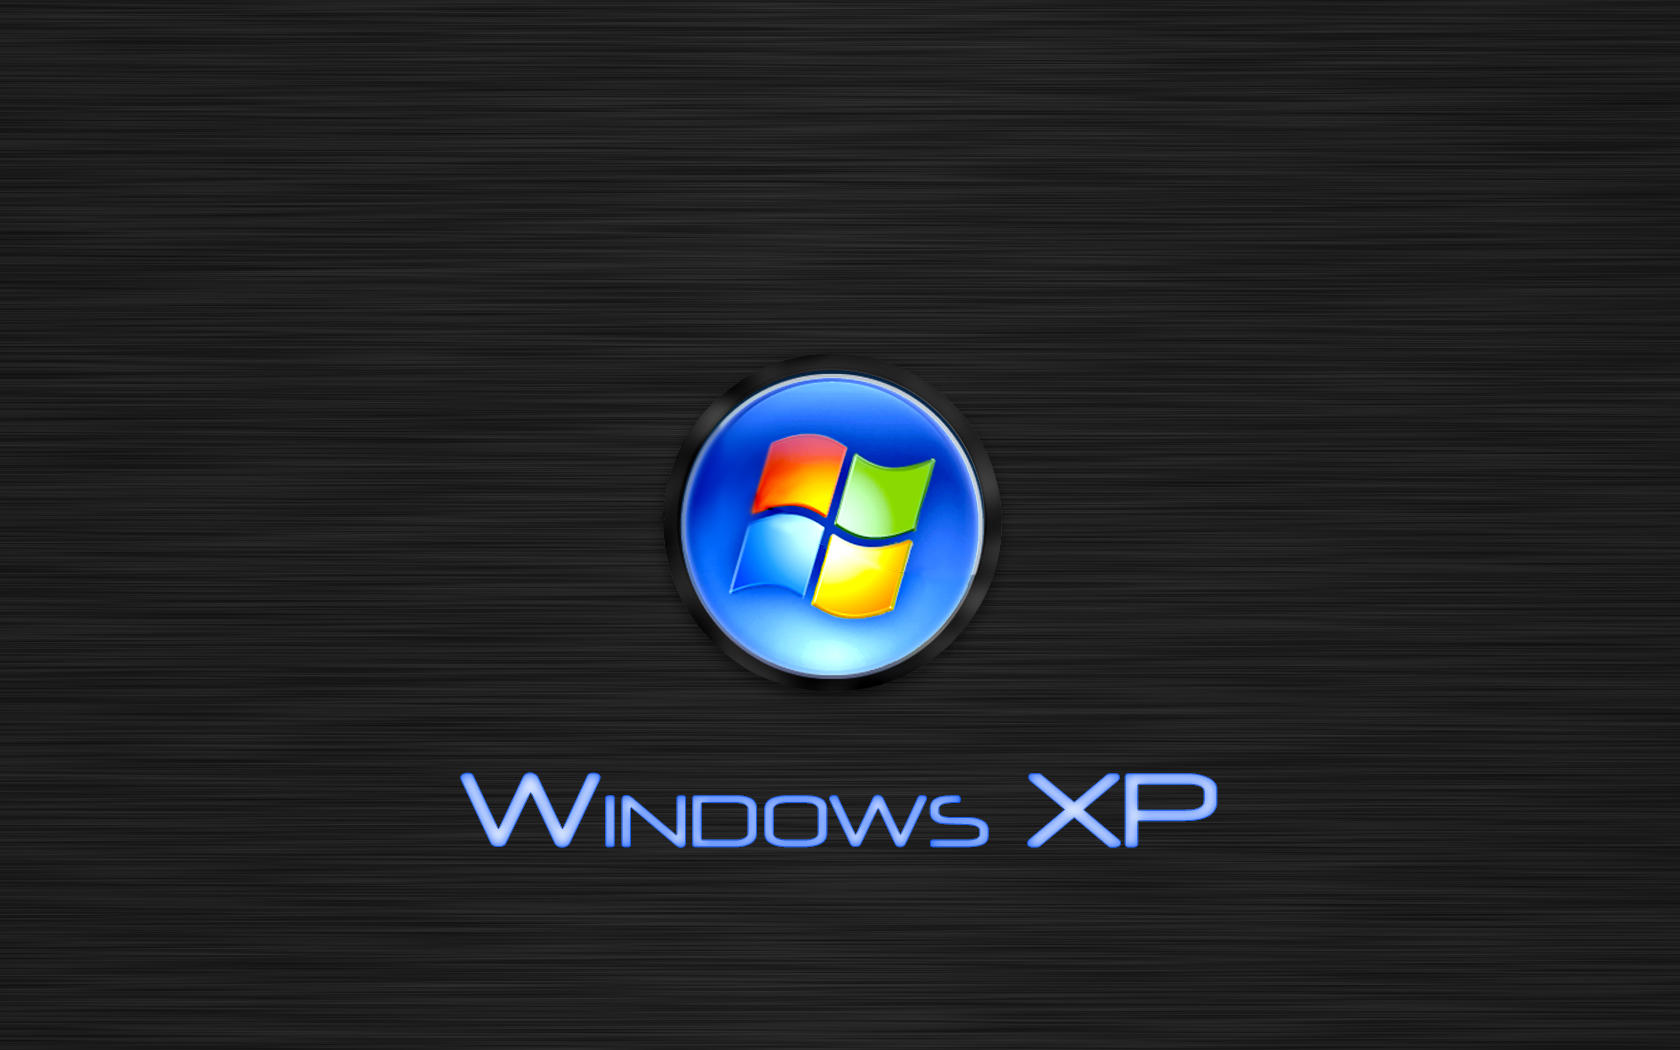 Windows_XP_Black_Brushed_Alum__by_AndoOKC.jpg